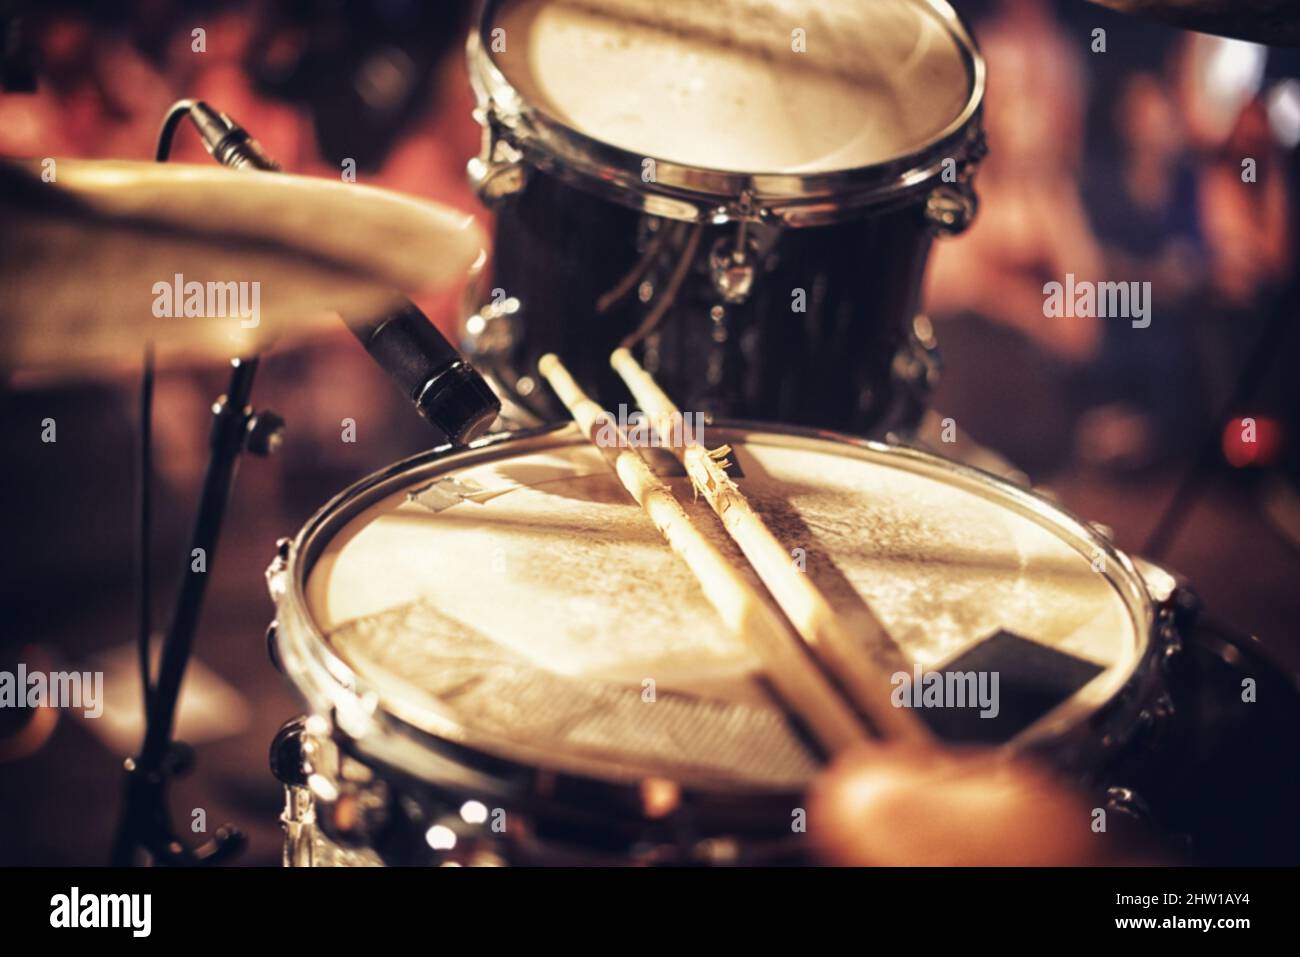 A beat waiting to happen. Drum kit set up on a stage with a crowd in the background. Stock Photo